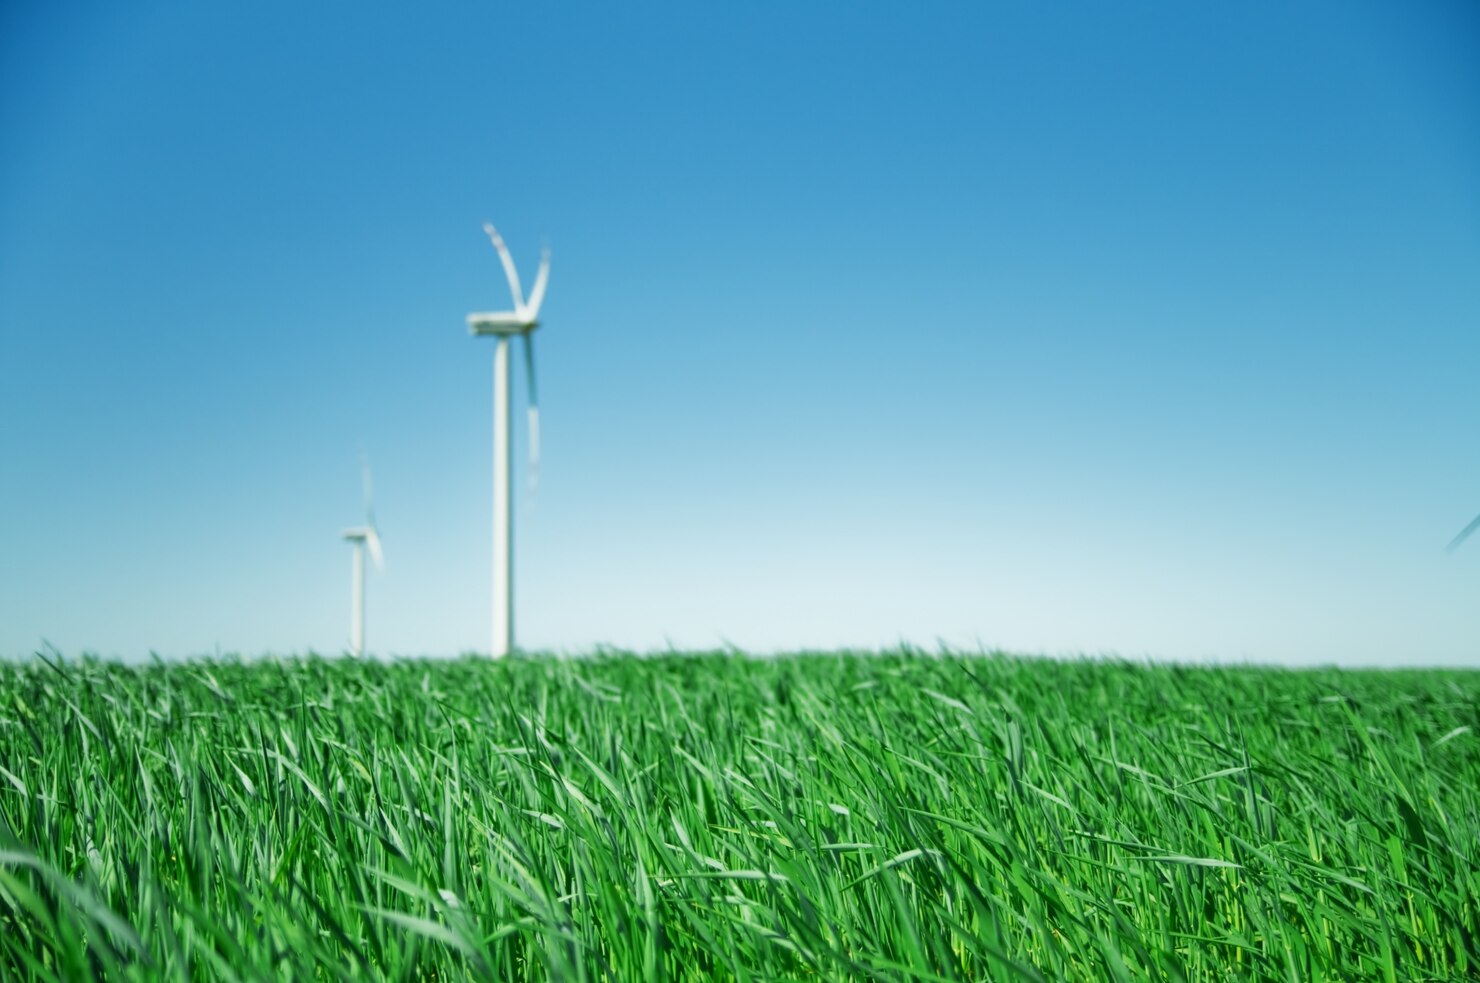 Image of wind turbines spinning in field with blue sky